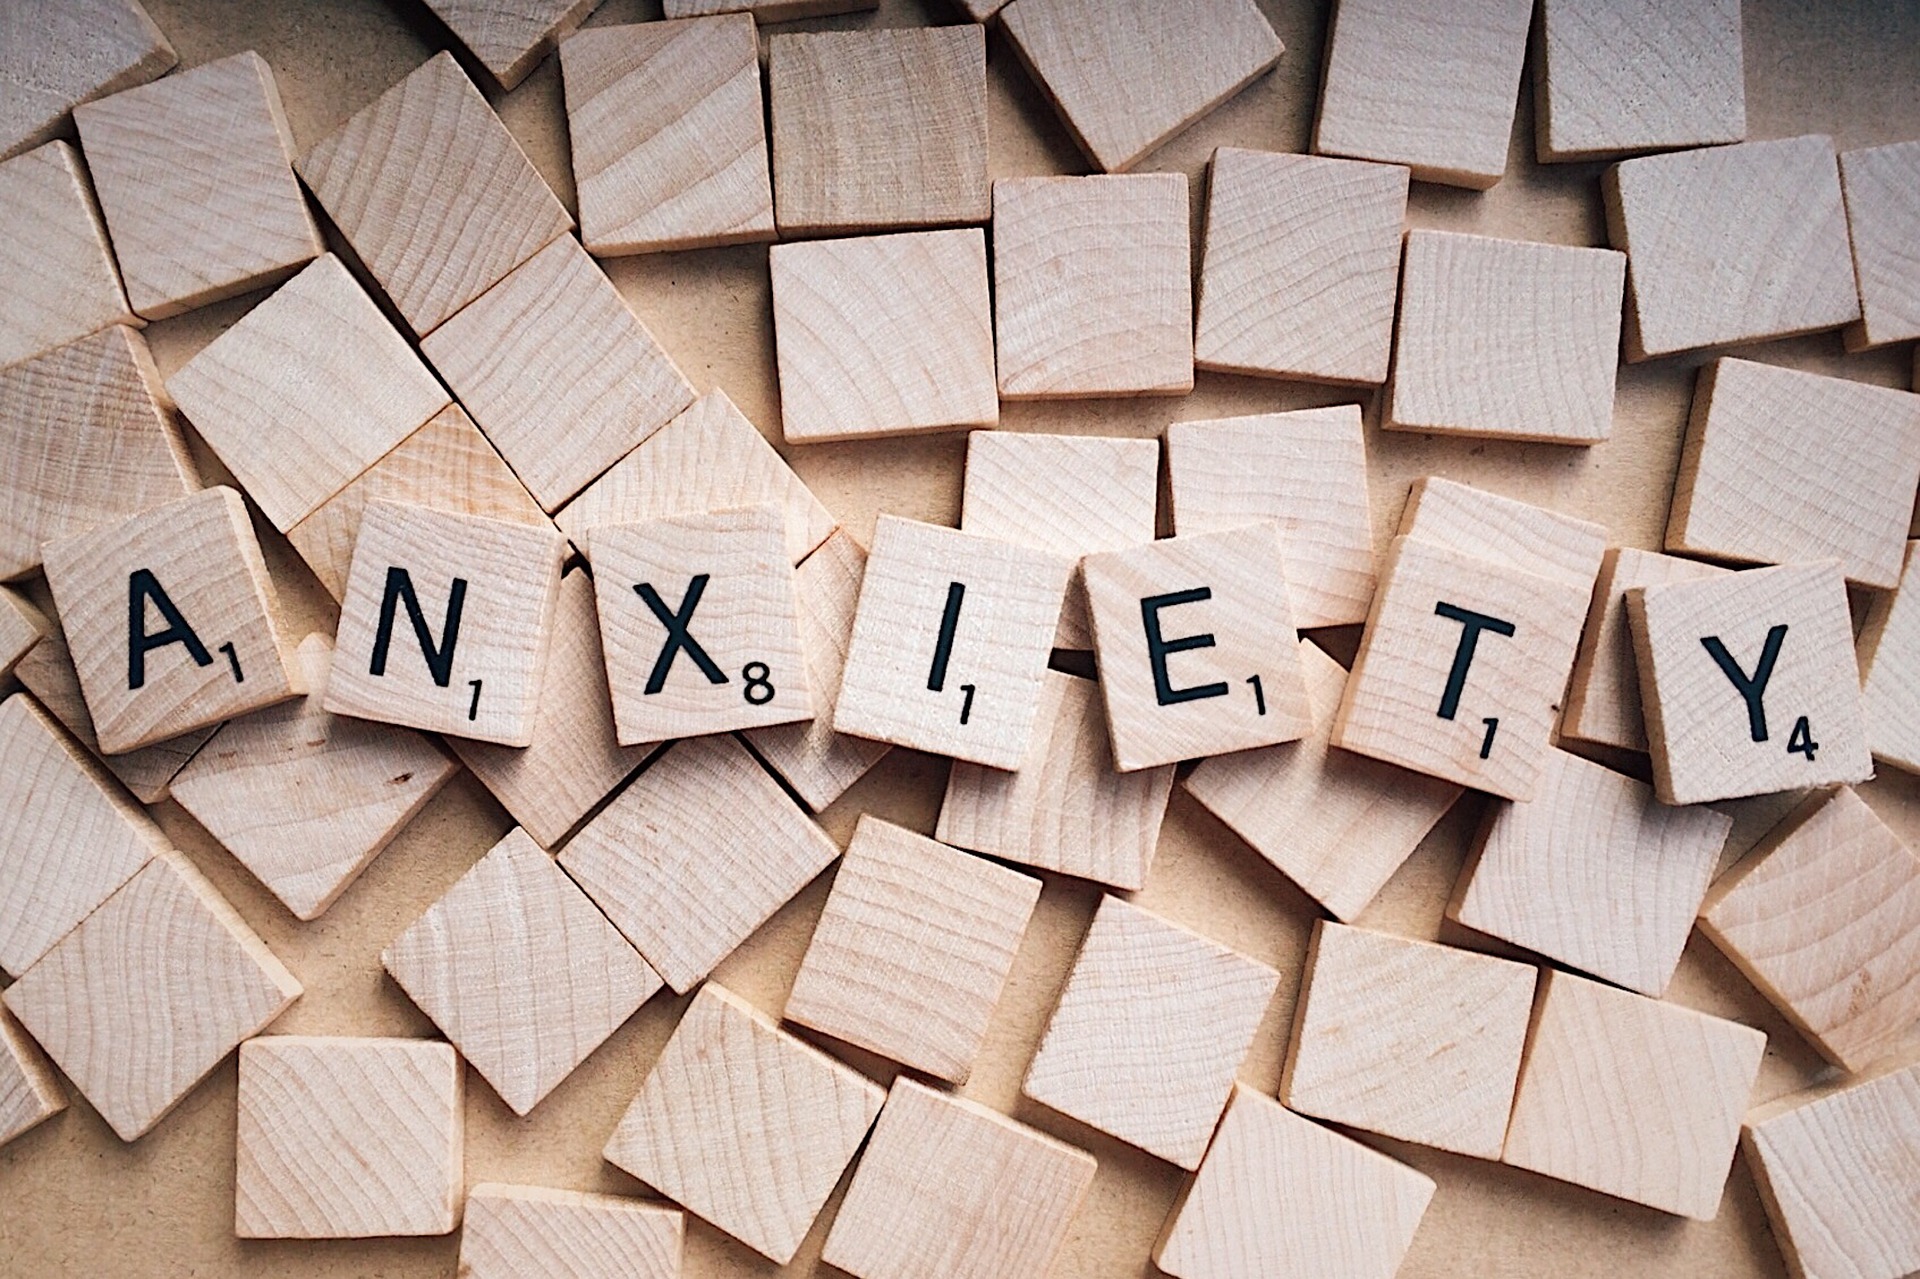 Learning how to cope with anxiety